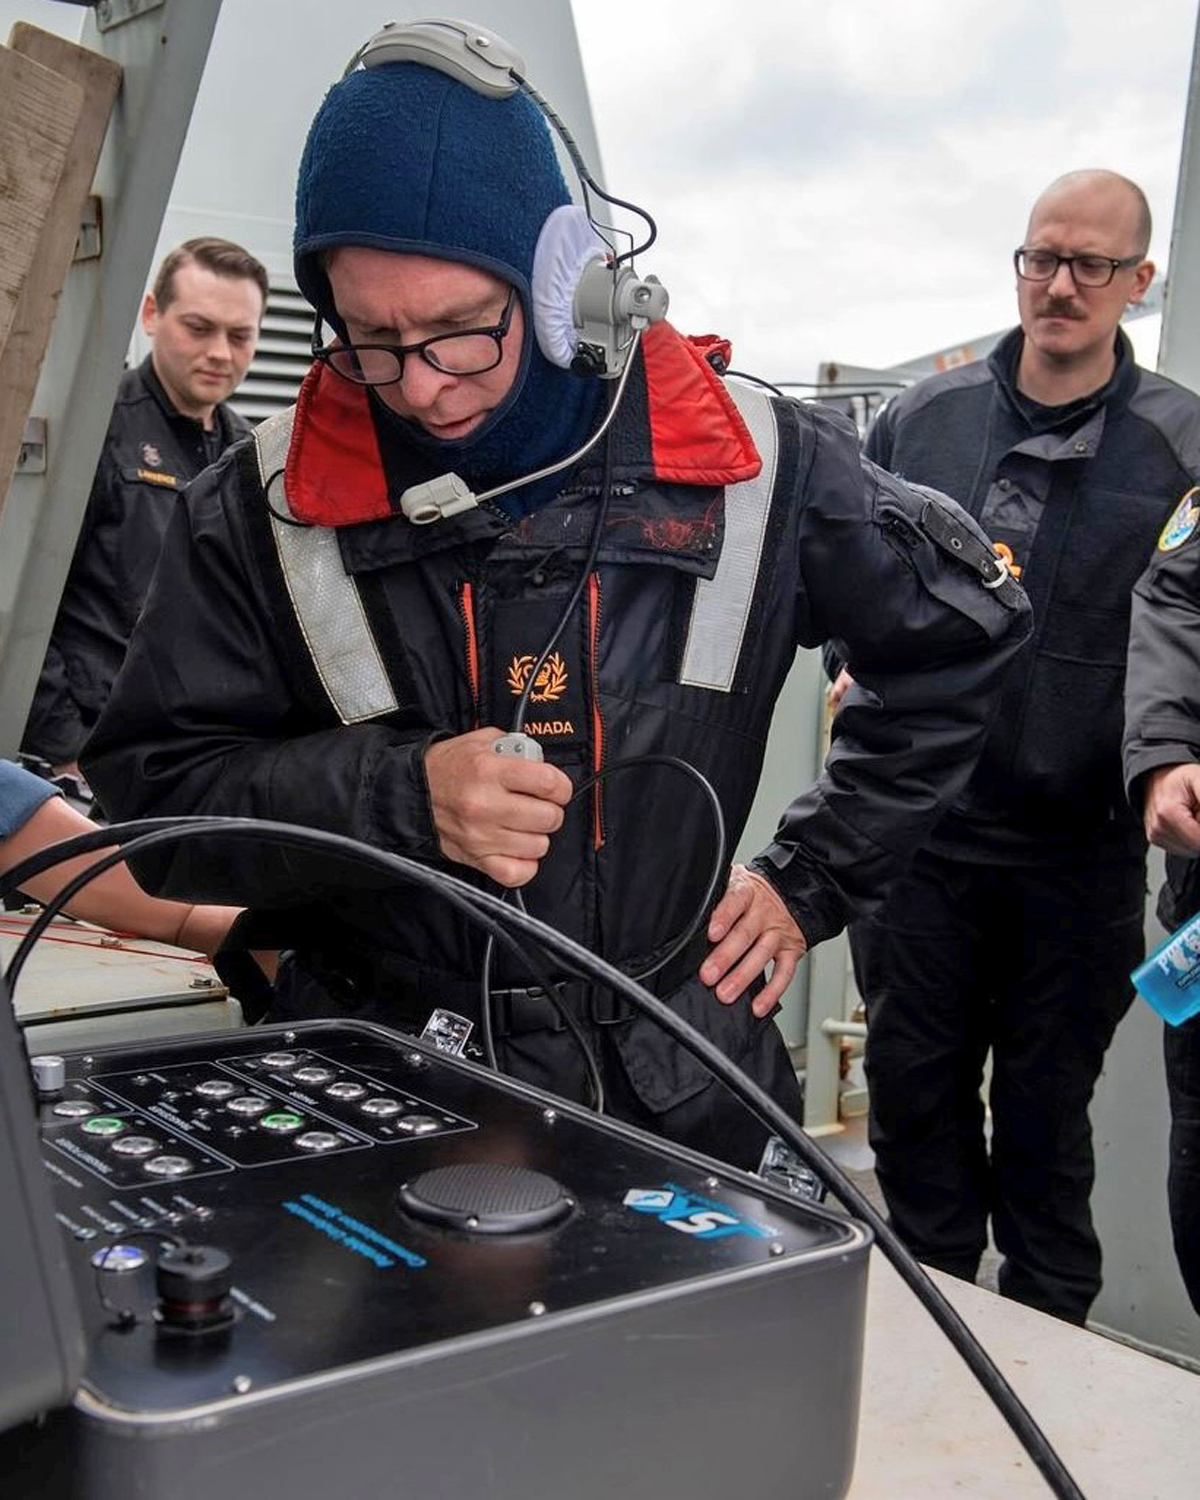 Chief Petty Officer 2nd Class (CPO2) Nelson Harvey speaks with HMCS Edmonton crew using HMCS Yellowknife’s underwater telephone.